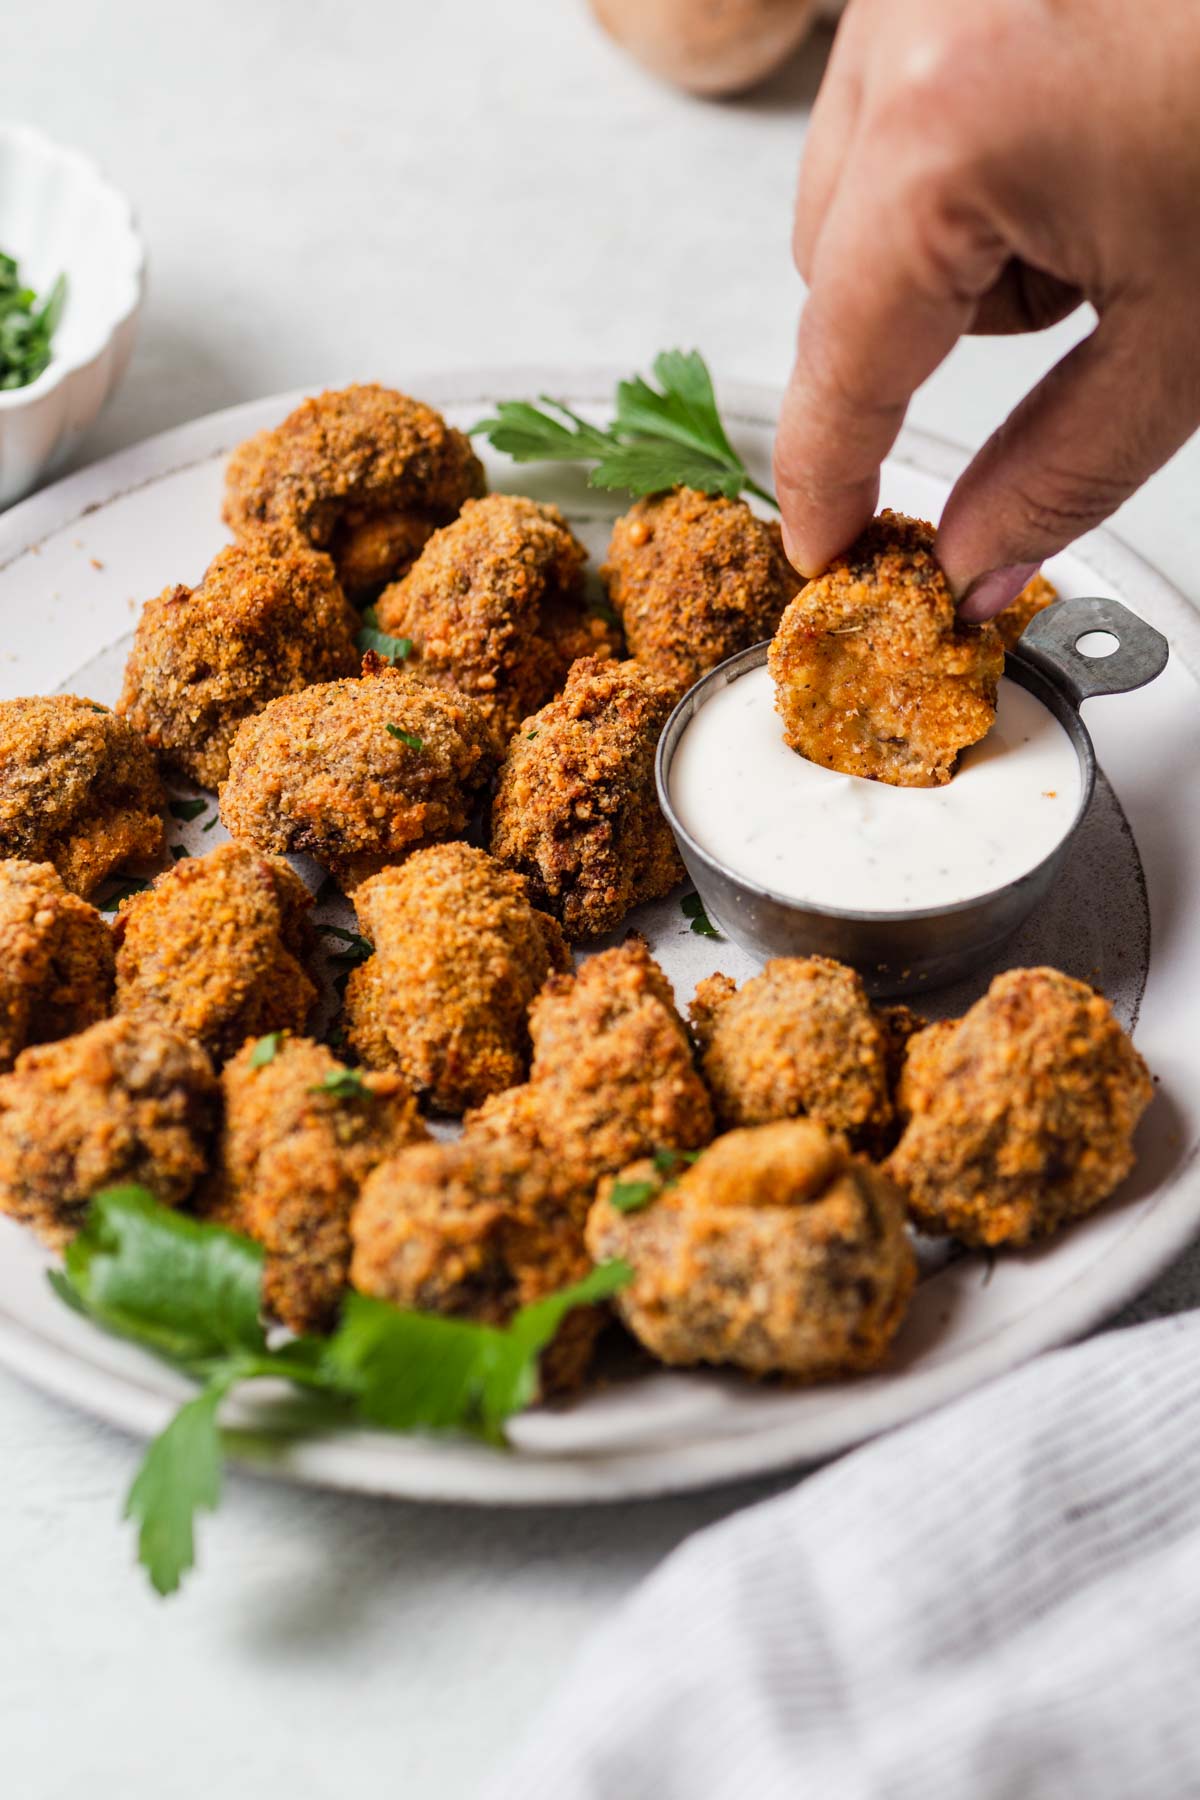 crispy air fryer breaded mushrooms with a ranch dip on the side.